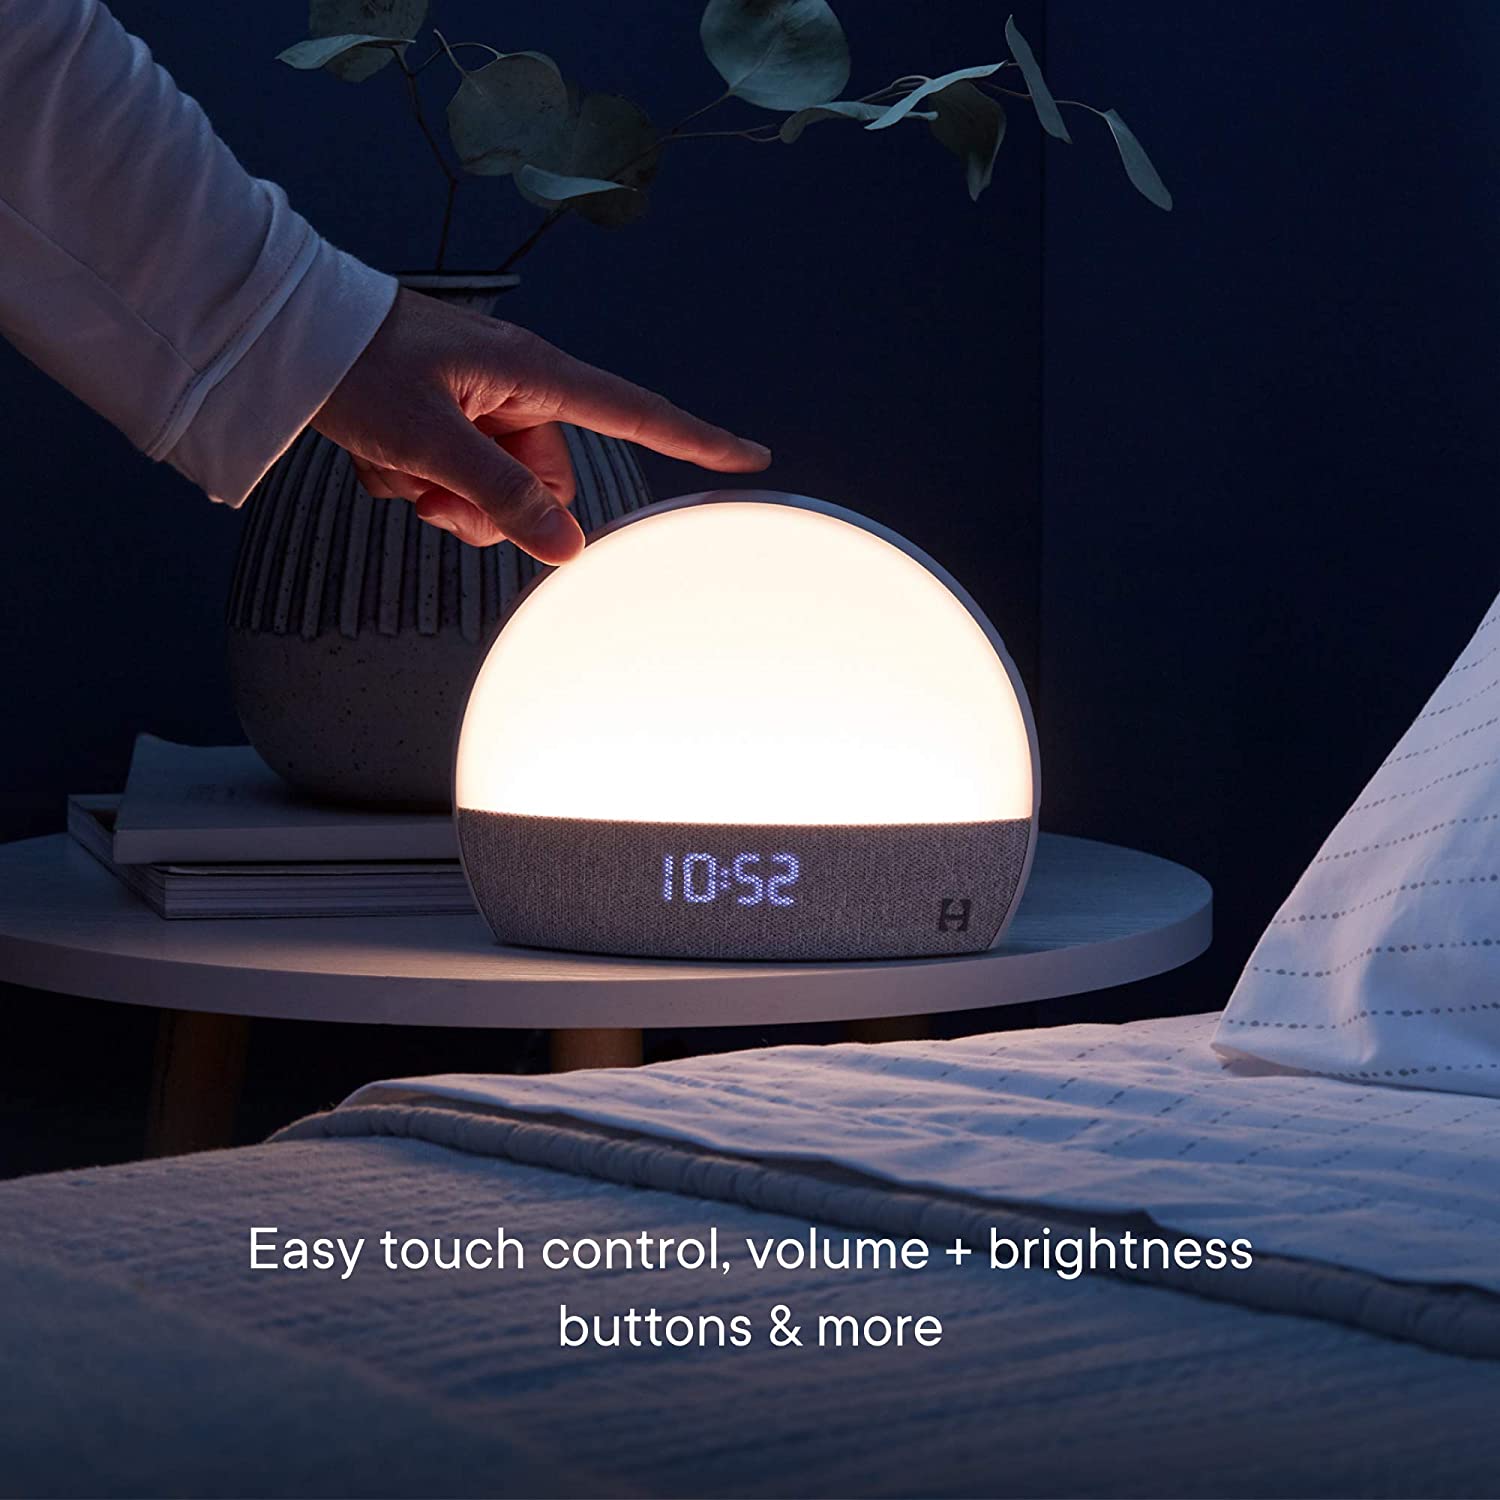 Hatch Restore - Sound Machine, Smart Light, Personal Sleep Routine, Bedside Reading Light, Wind Down Content and Sunrise Alarm Clock for Gentle Wake Up - image 4 of 6